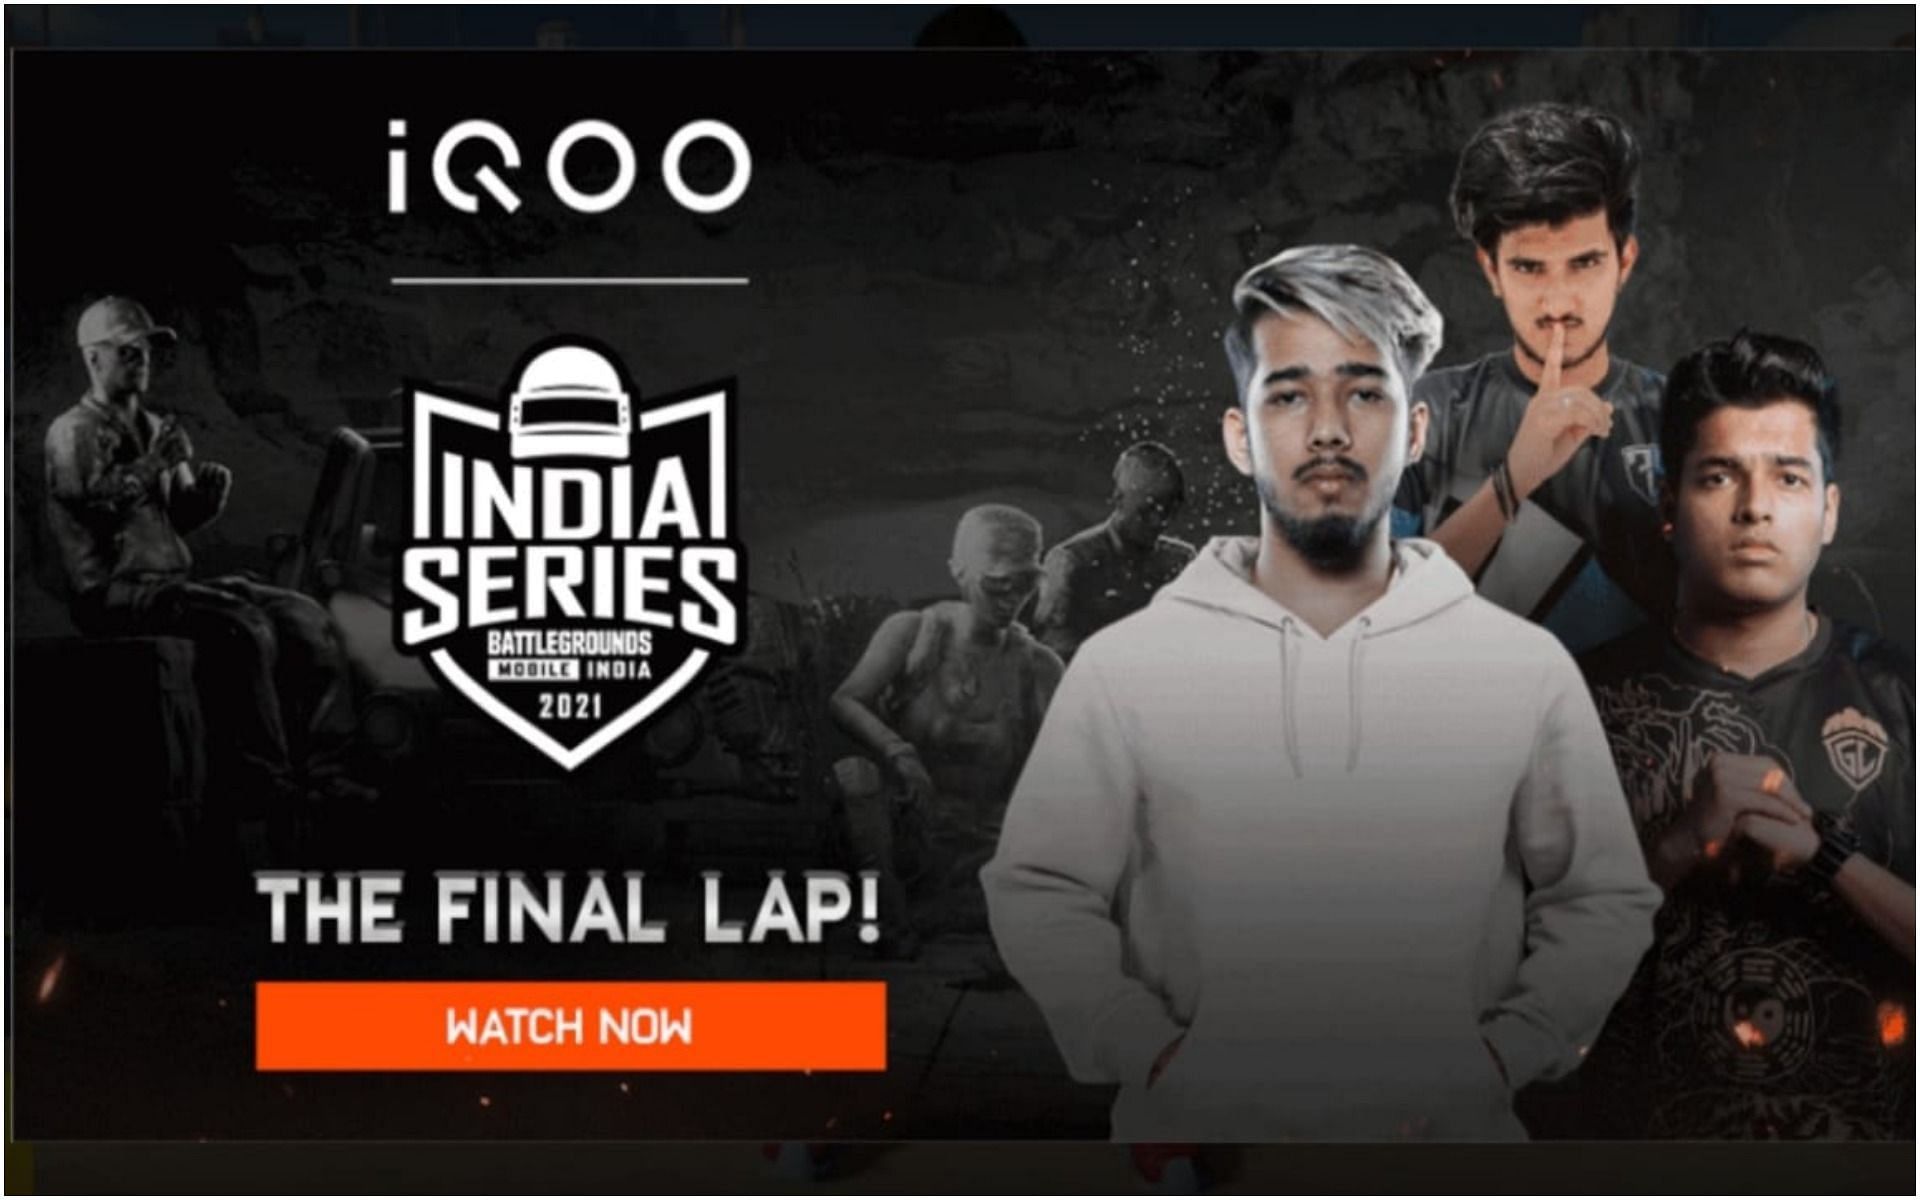 Waiting for the commencement of the Grand Finals of the Battlegrounds Mobile India Series (Image via Krafton)